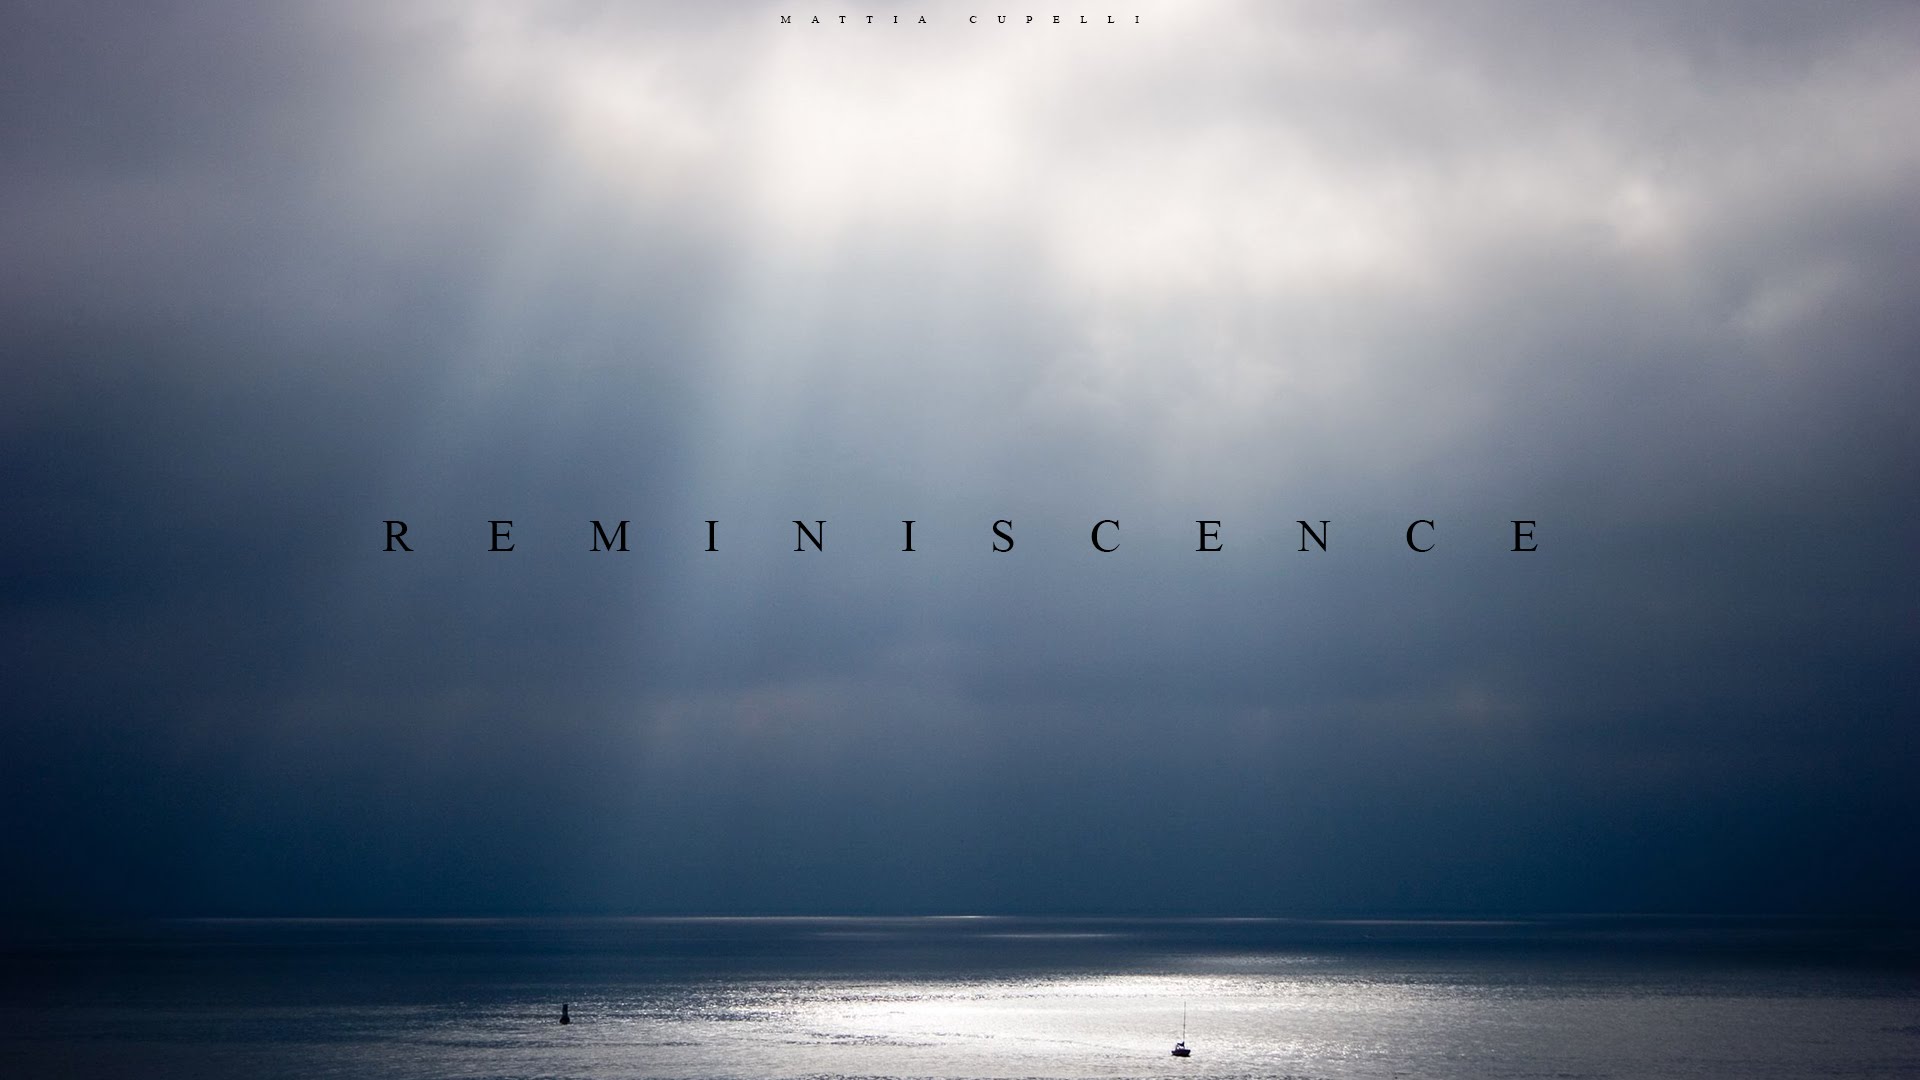 HQ Reminiscence Wallpapers | File 119.22Kb